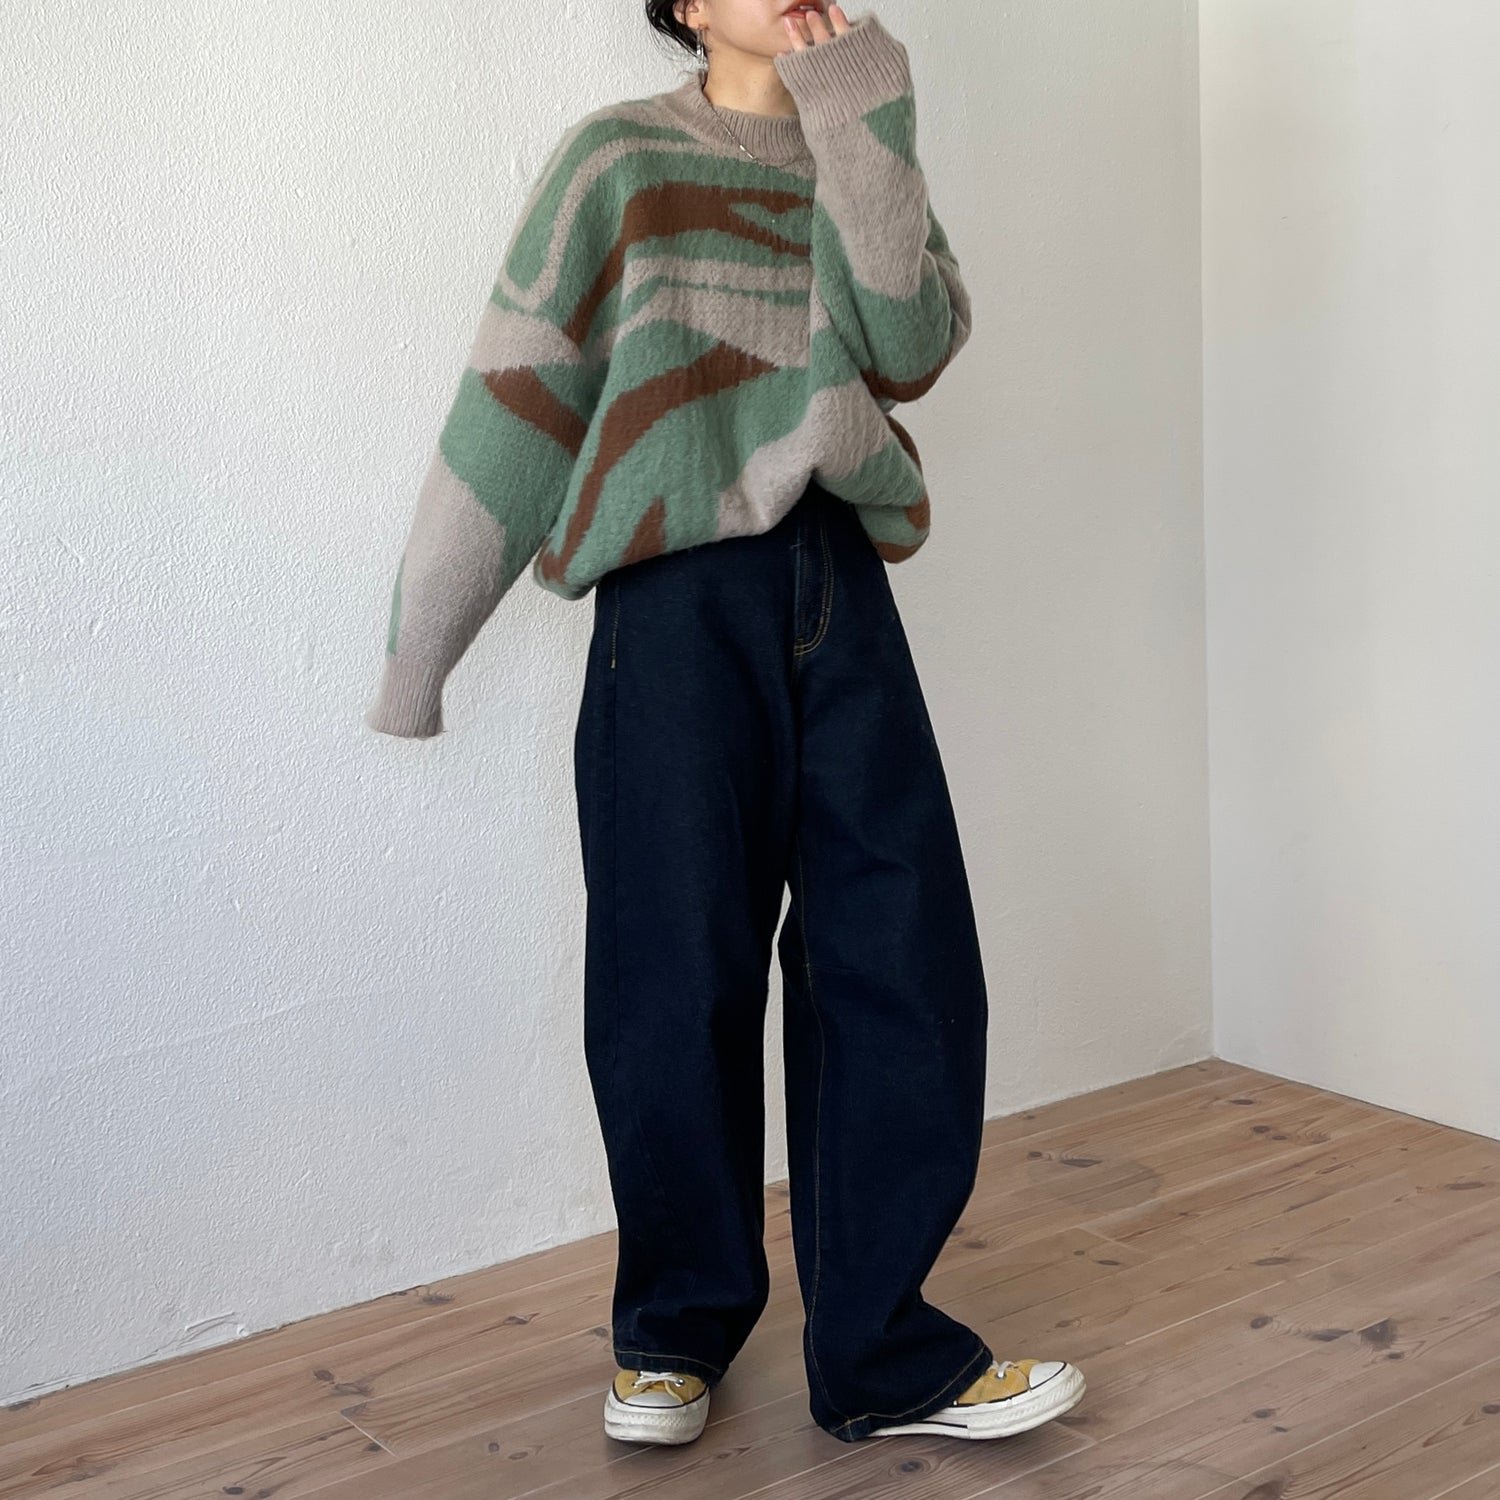 【SAMPLE】over size camouflage knit